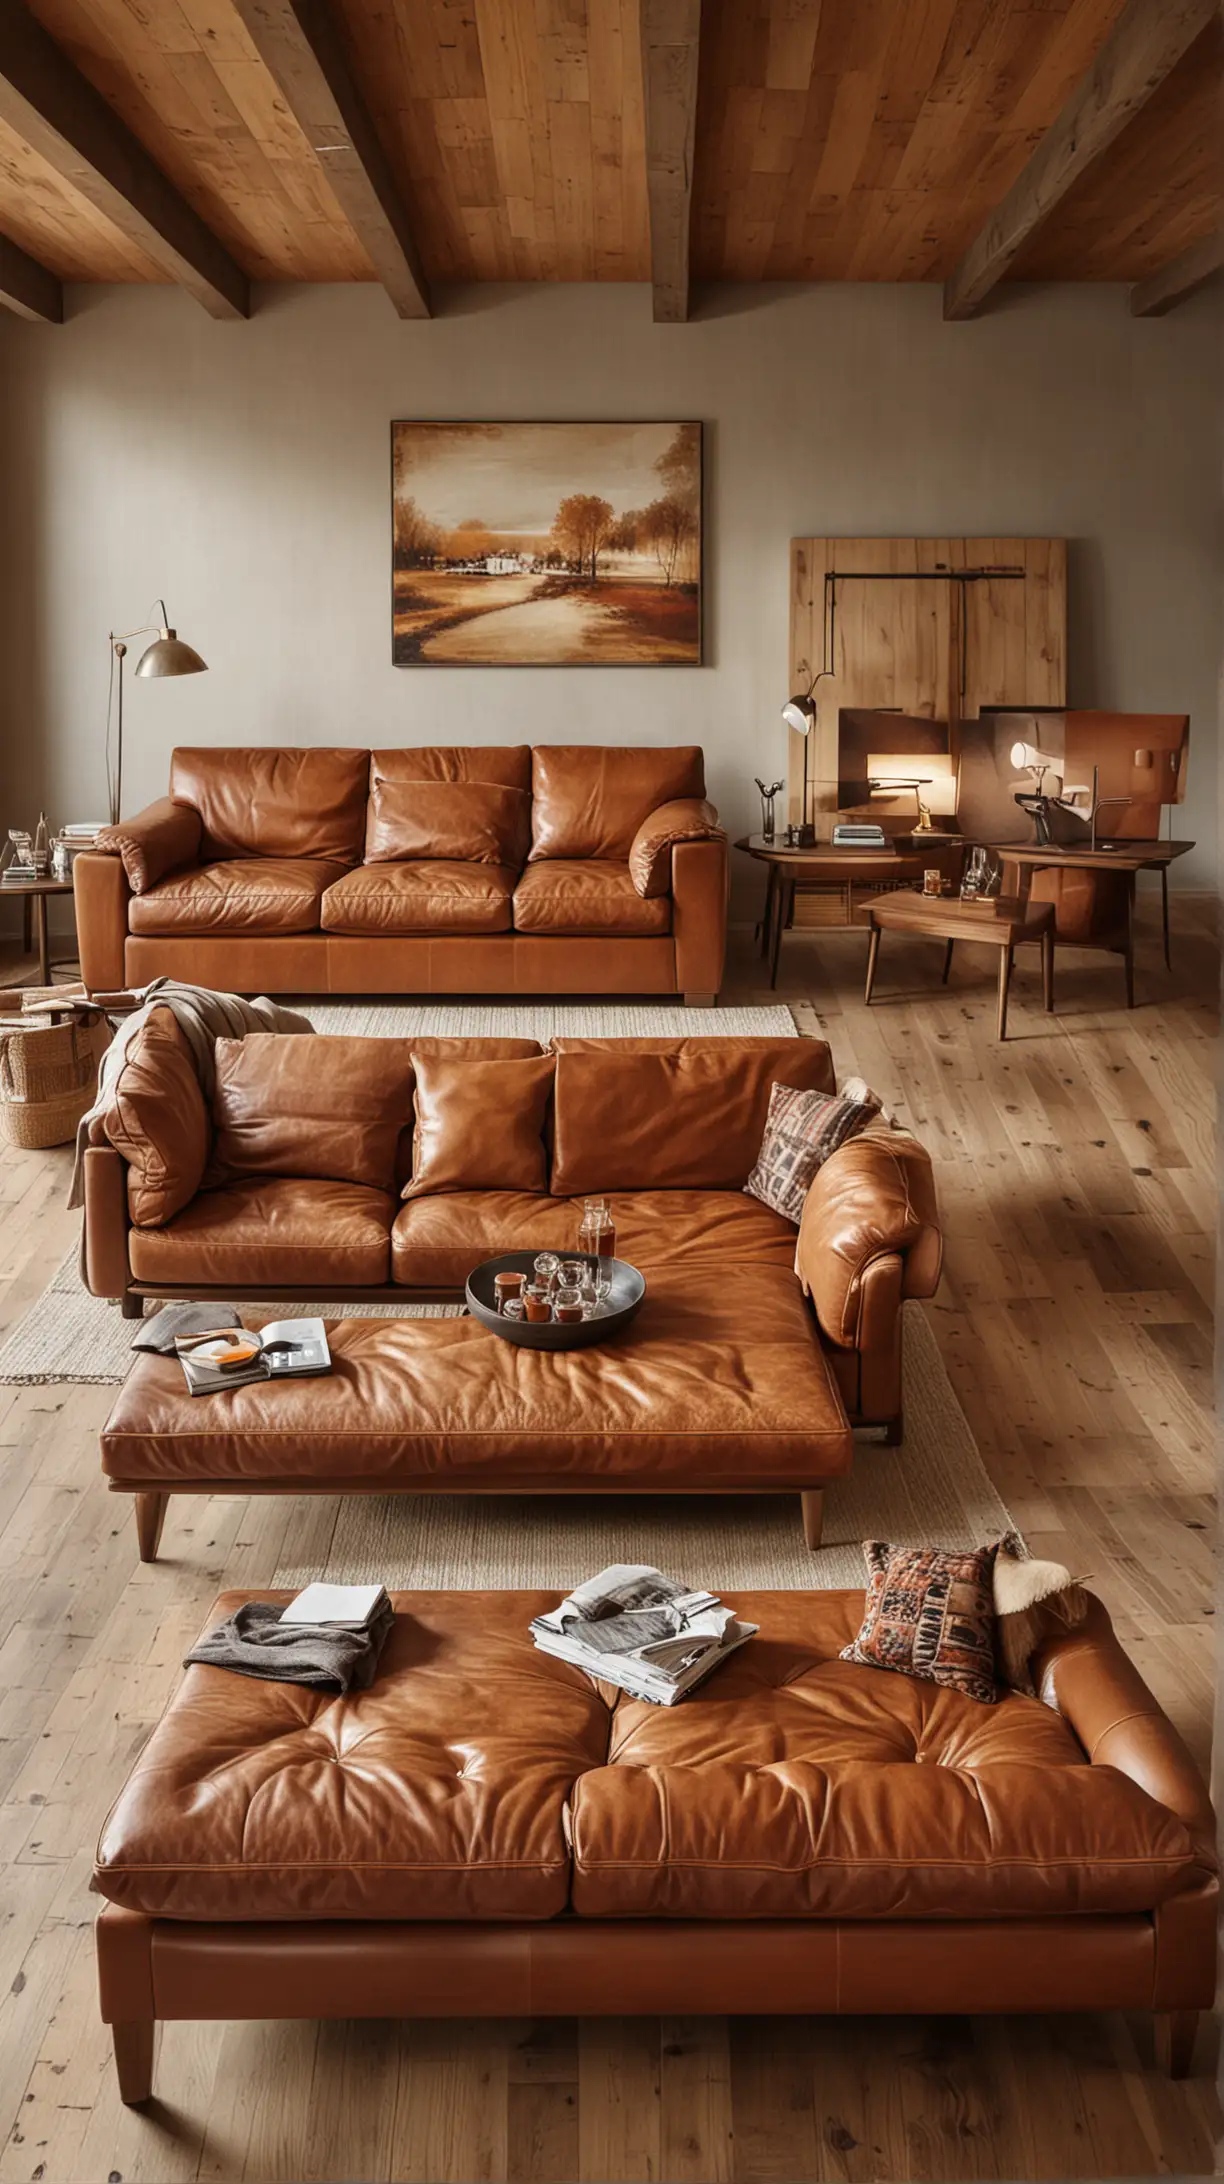 A living room with a cognac leather couch surrounded by warm wooden furniture. The scene should be rich in textures and warmth, enhancing the cozy feel of the leather.